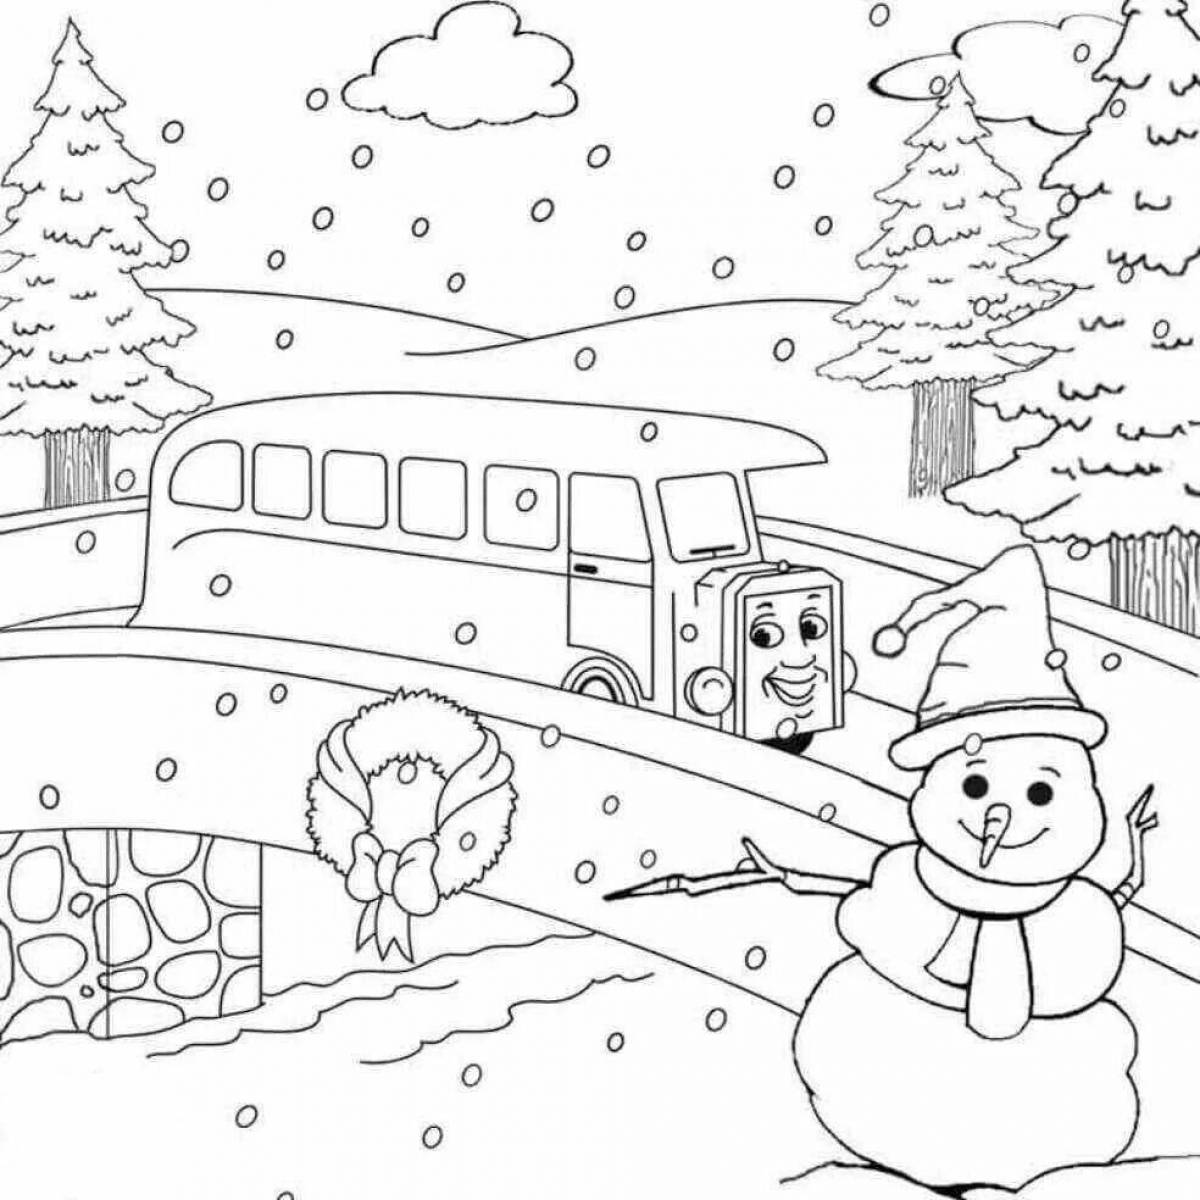 Great winter forest coloring book for 6-7 year olds